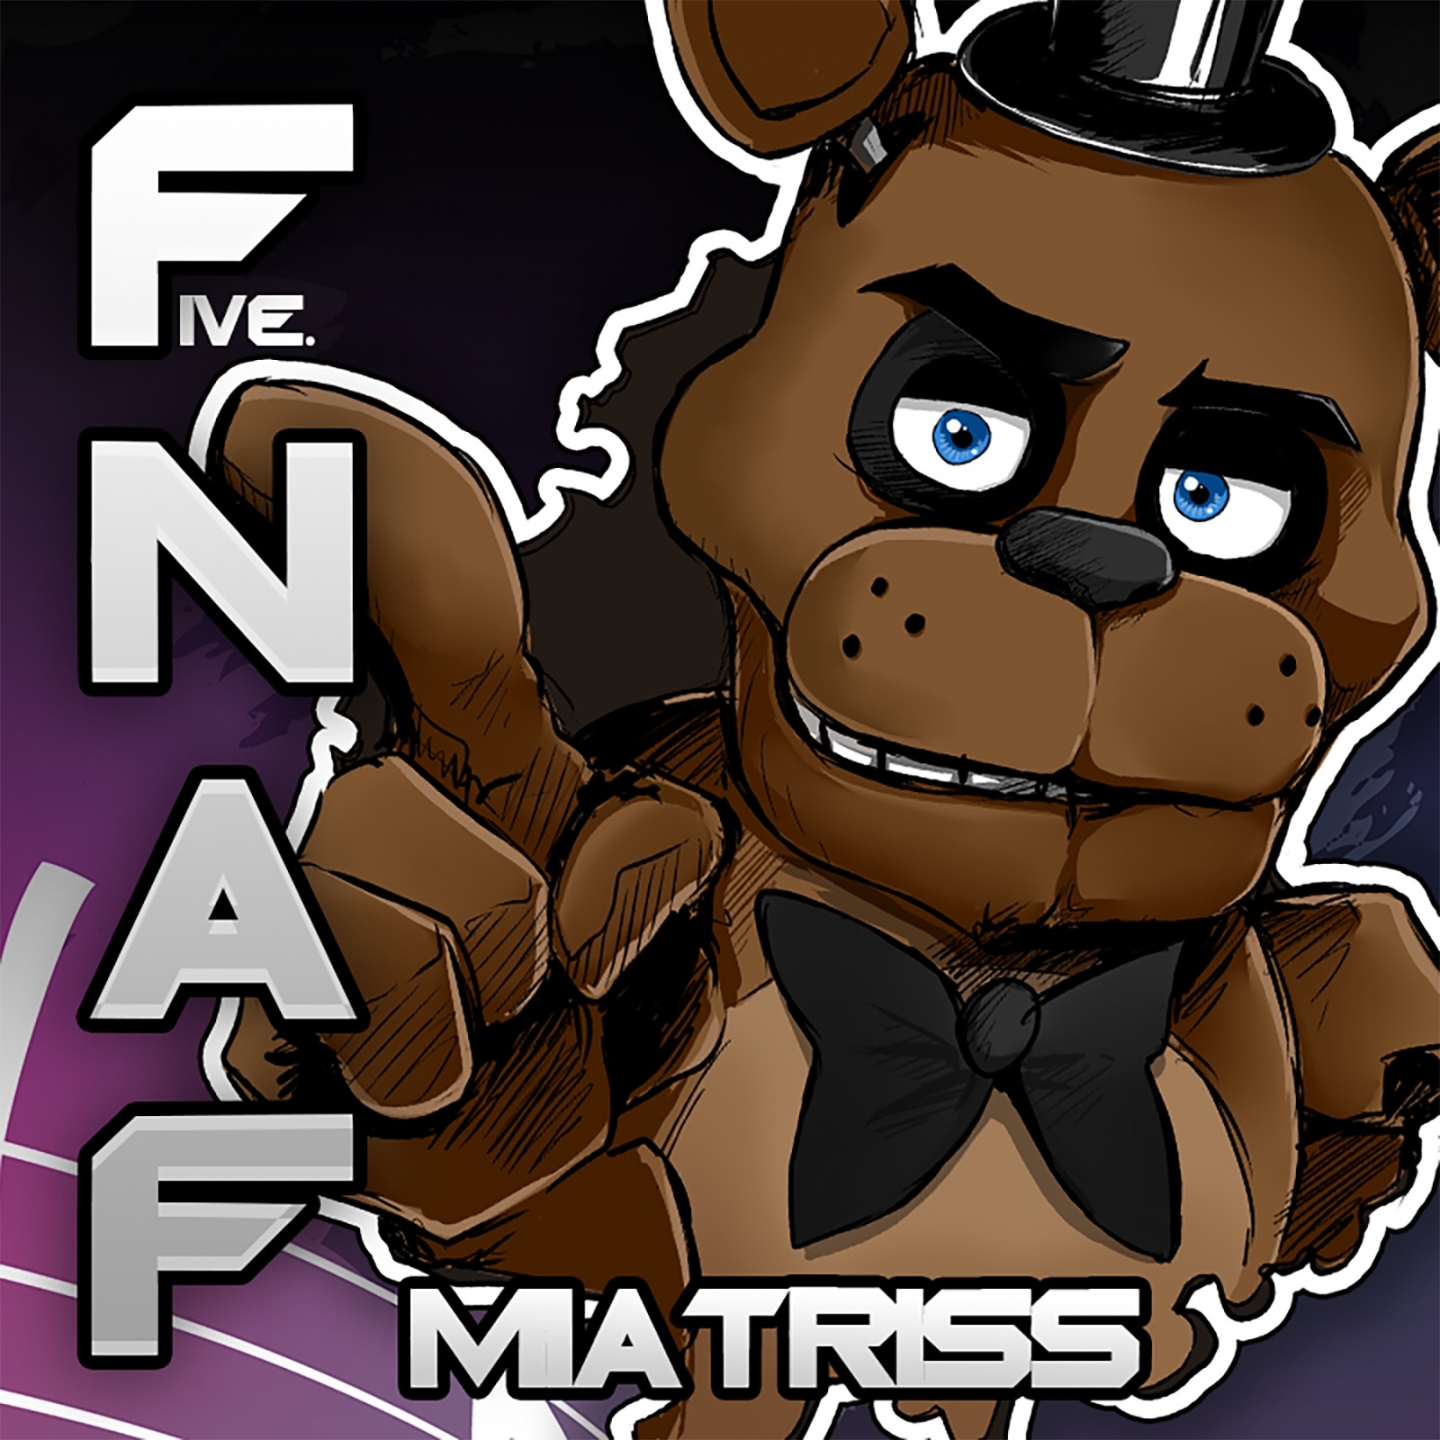 Wutabout the Fnaf